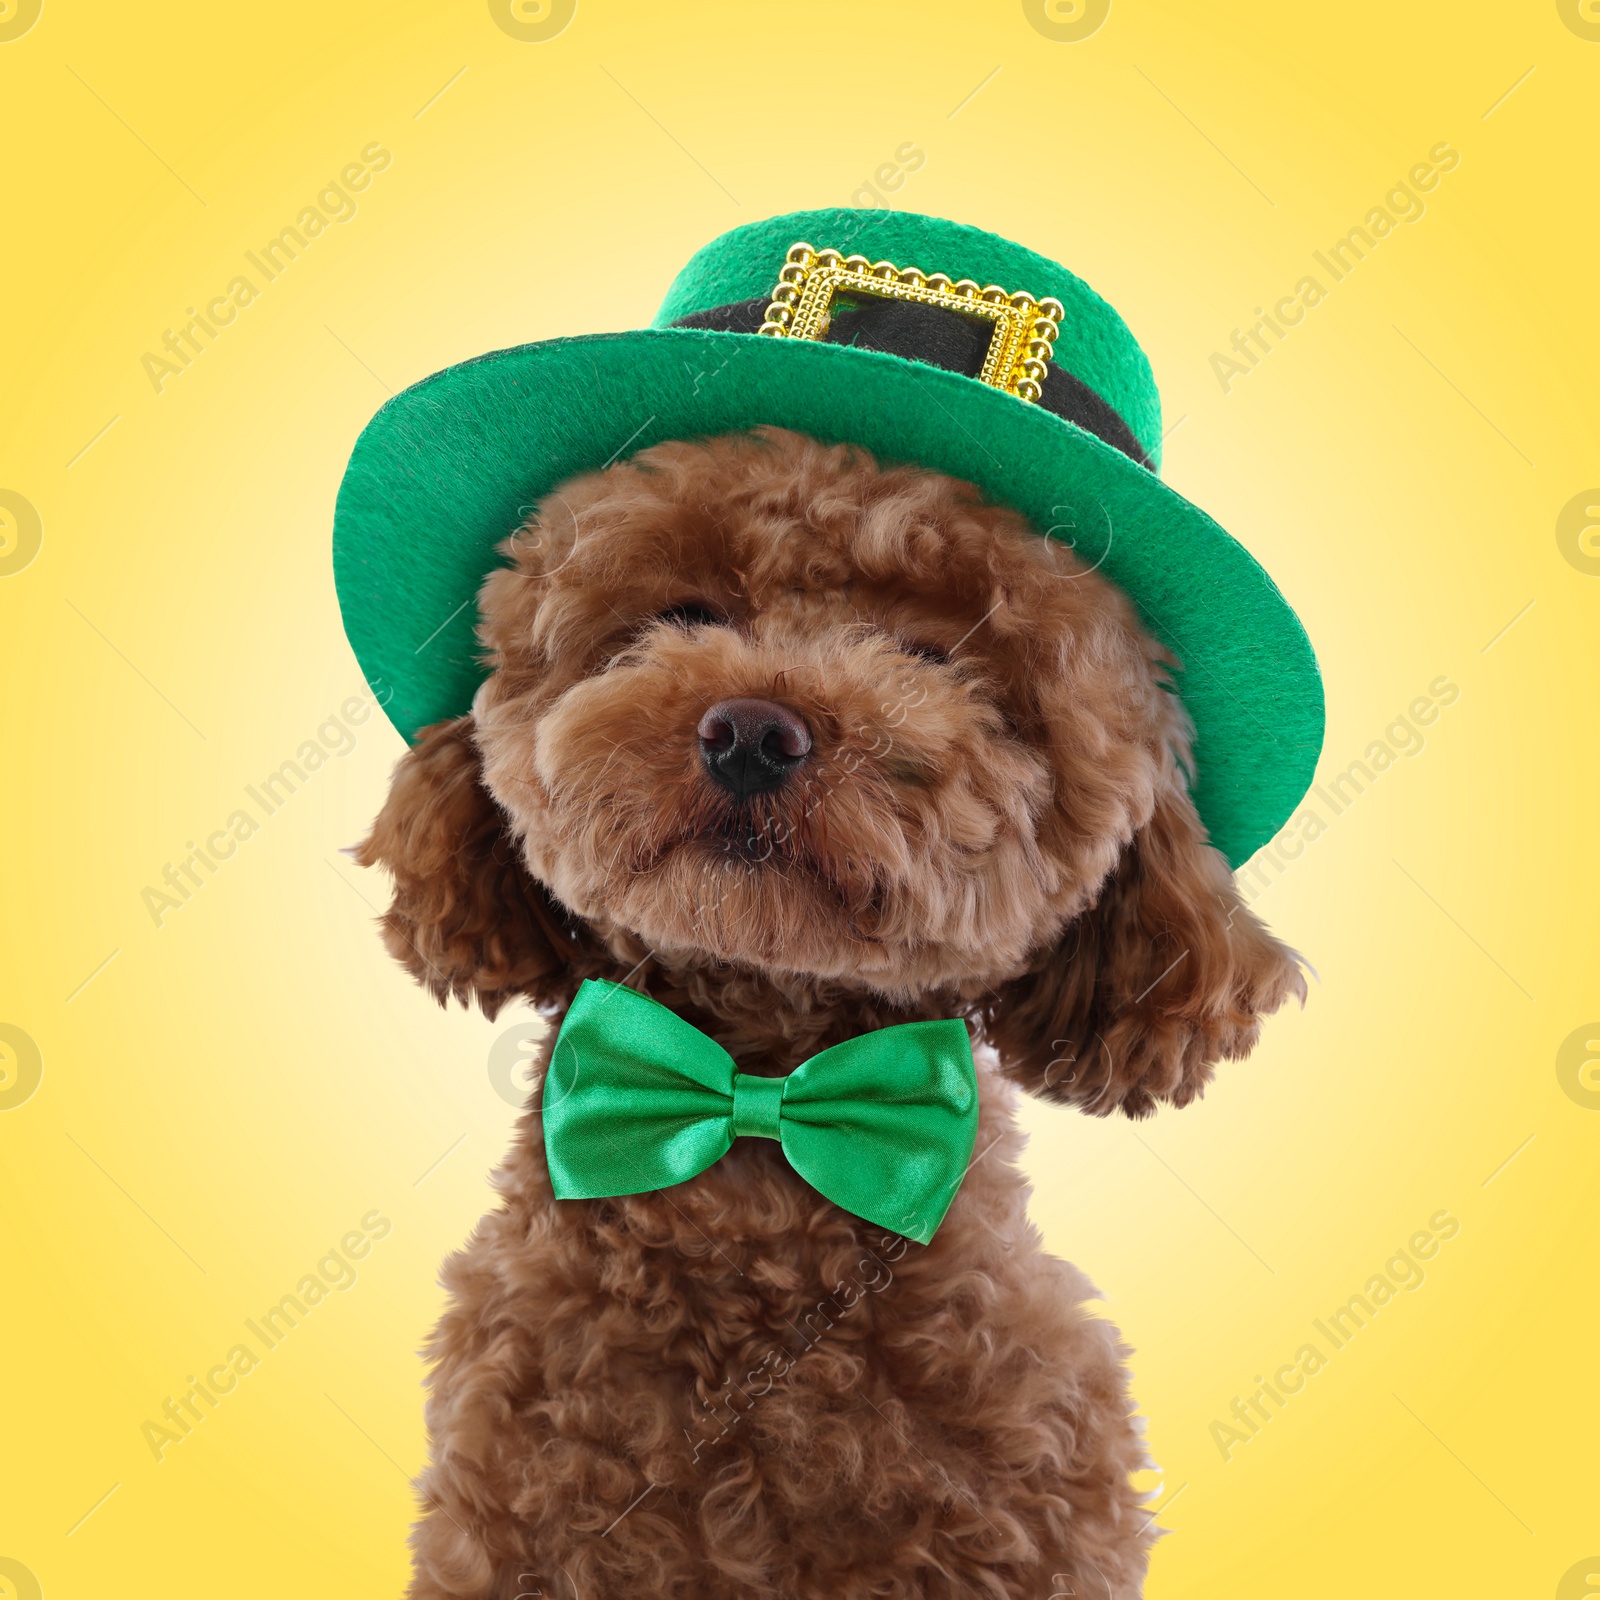 Image of St. Patrick's day celebration. Cute Maltipoo dog with leprechaun hat and green bow tie on yellow background